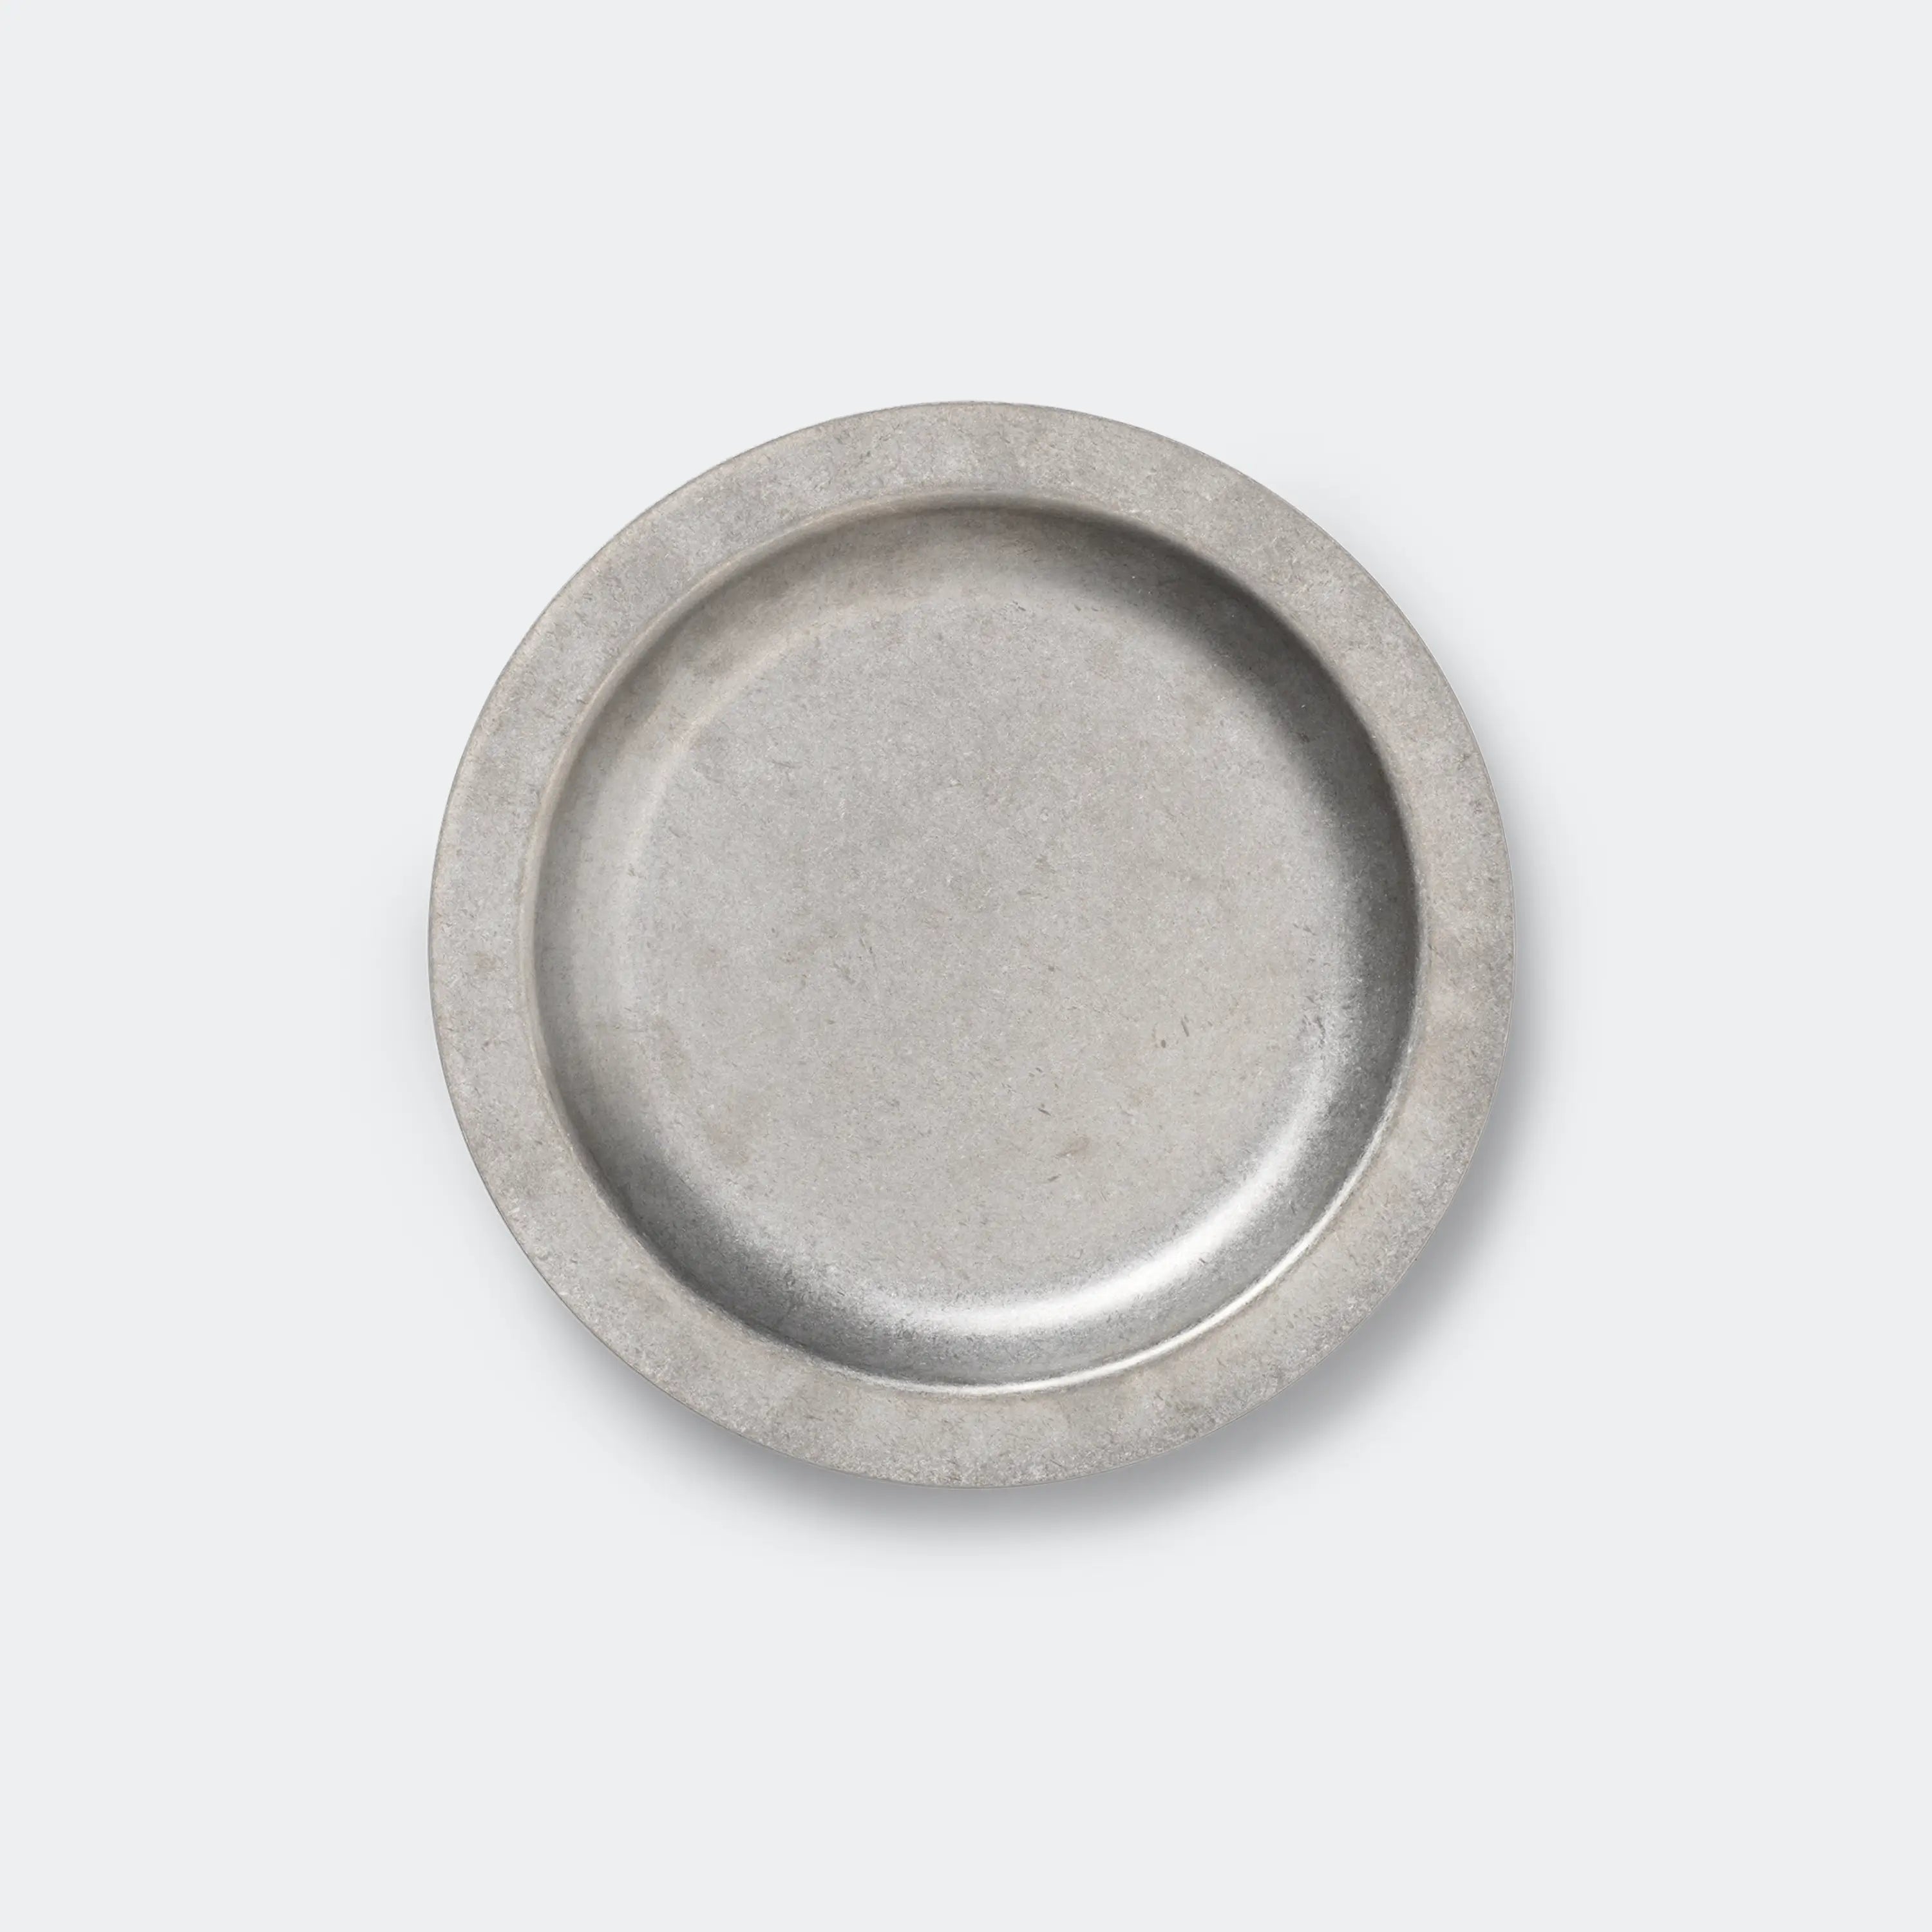 Ferm Living Tumbled Plate - KANSO